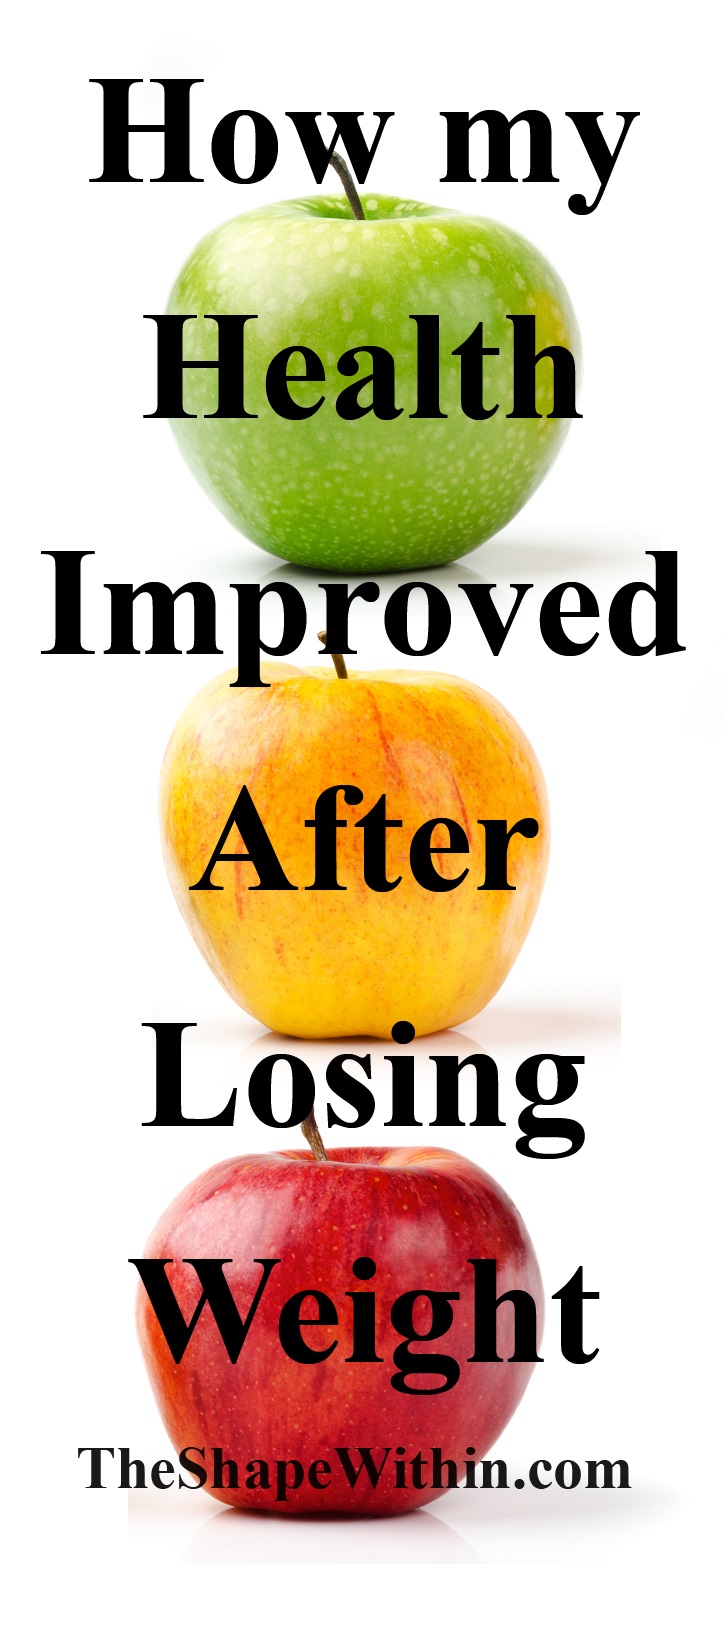 Not only will you look better after weight loss, but your body heals on the inside as well. See how my health improved after losing weight | TheShapeWithin.com